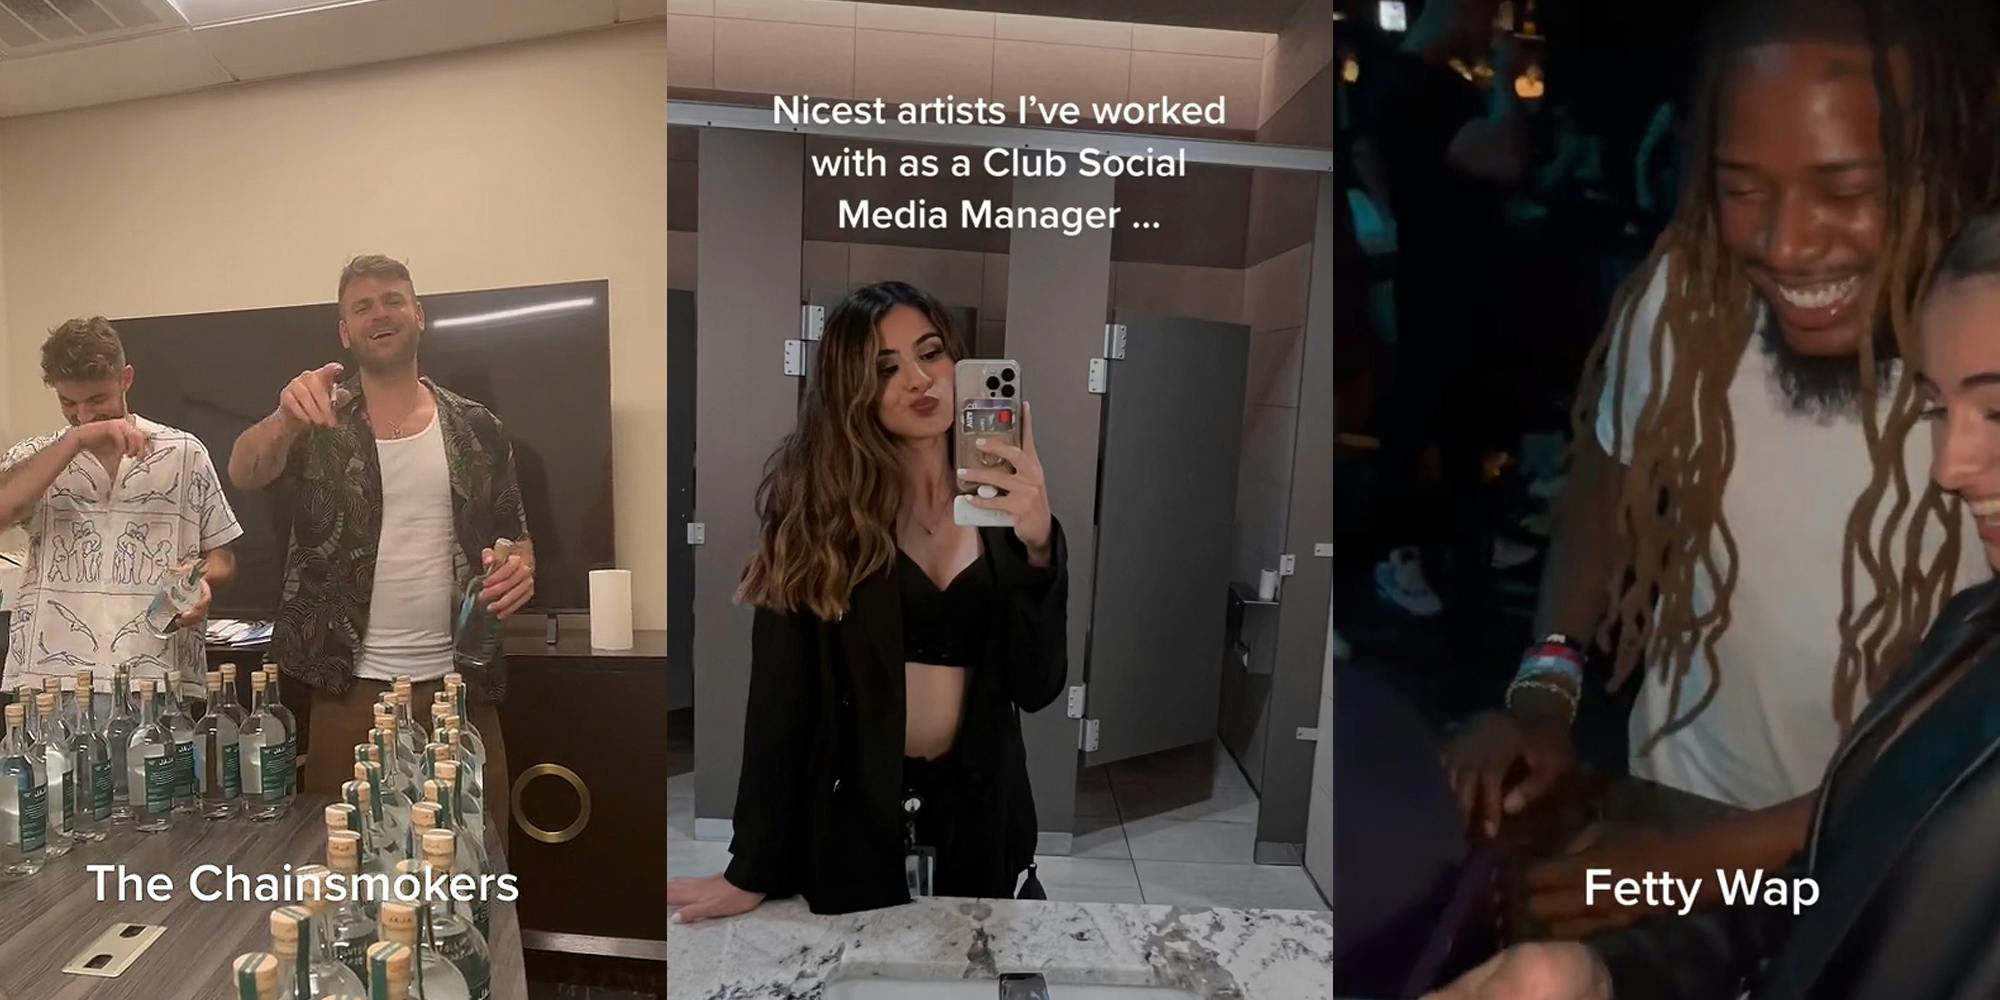 The Chainsmokers laughing pointing and speaking at club caption "The Chainsmokers" (l) Woman posing in mirror selfie in bathroom caption "Nicest artists I've worked with as a Club Social Media Manager..." (c) Woman holding phone next to Fetty Wap smiling in club caption "Fetty Wap" (r)